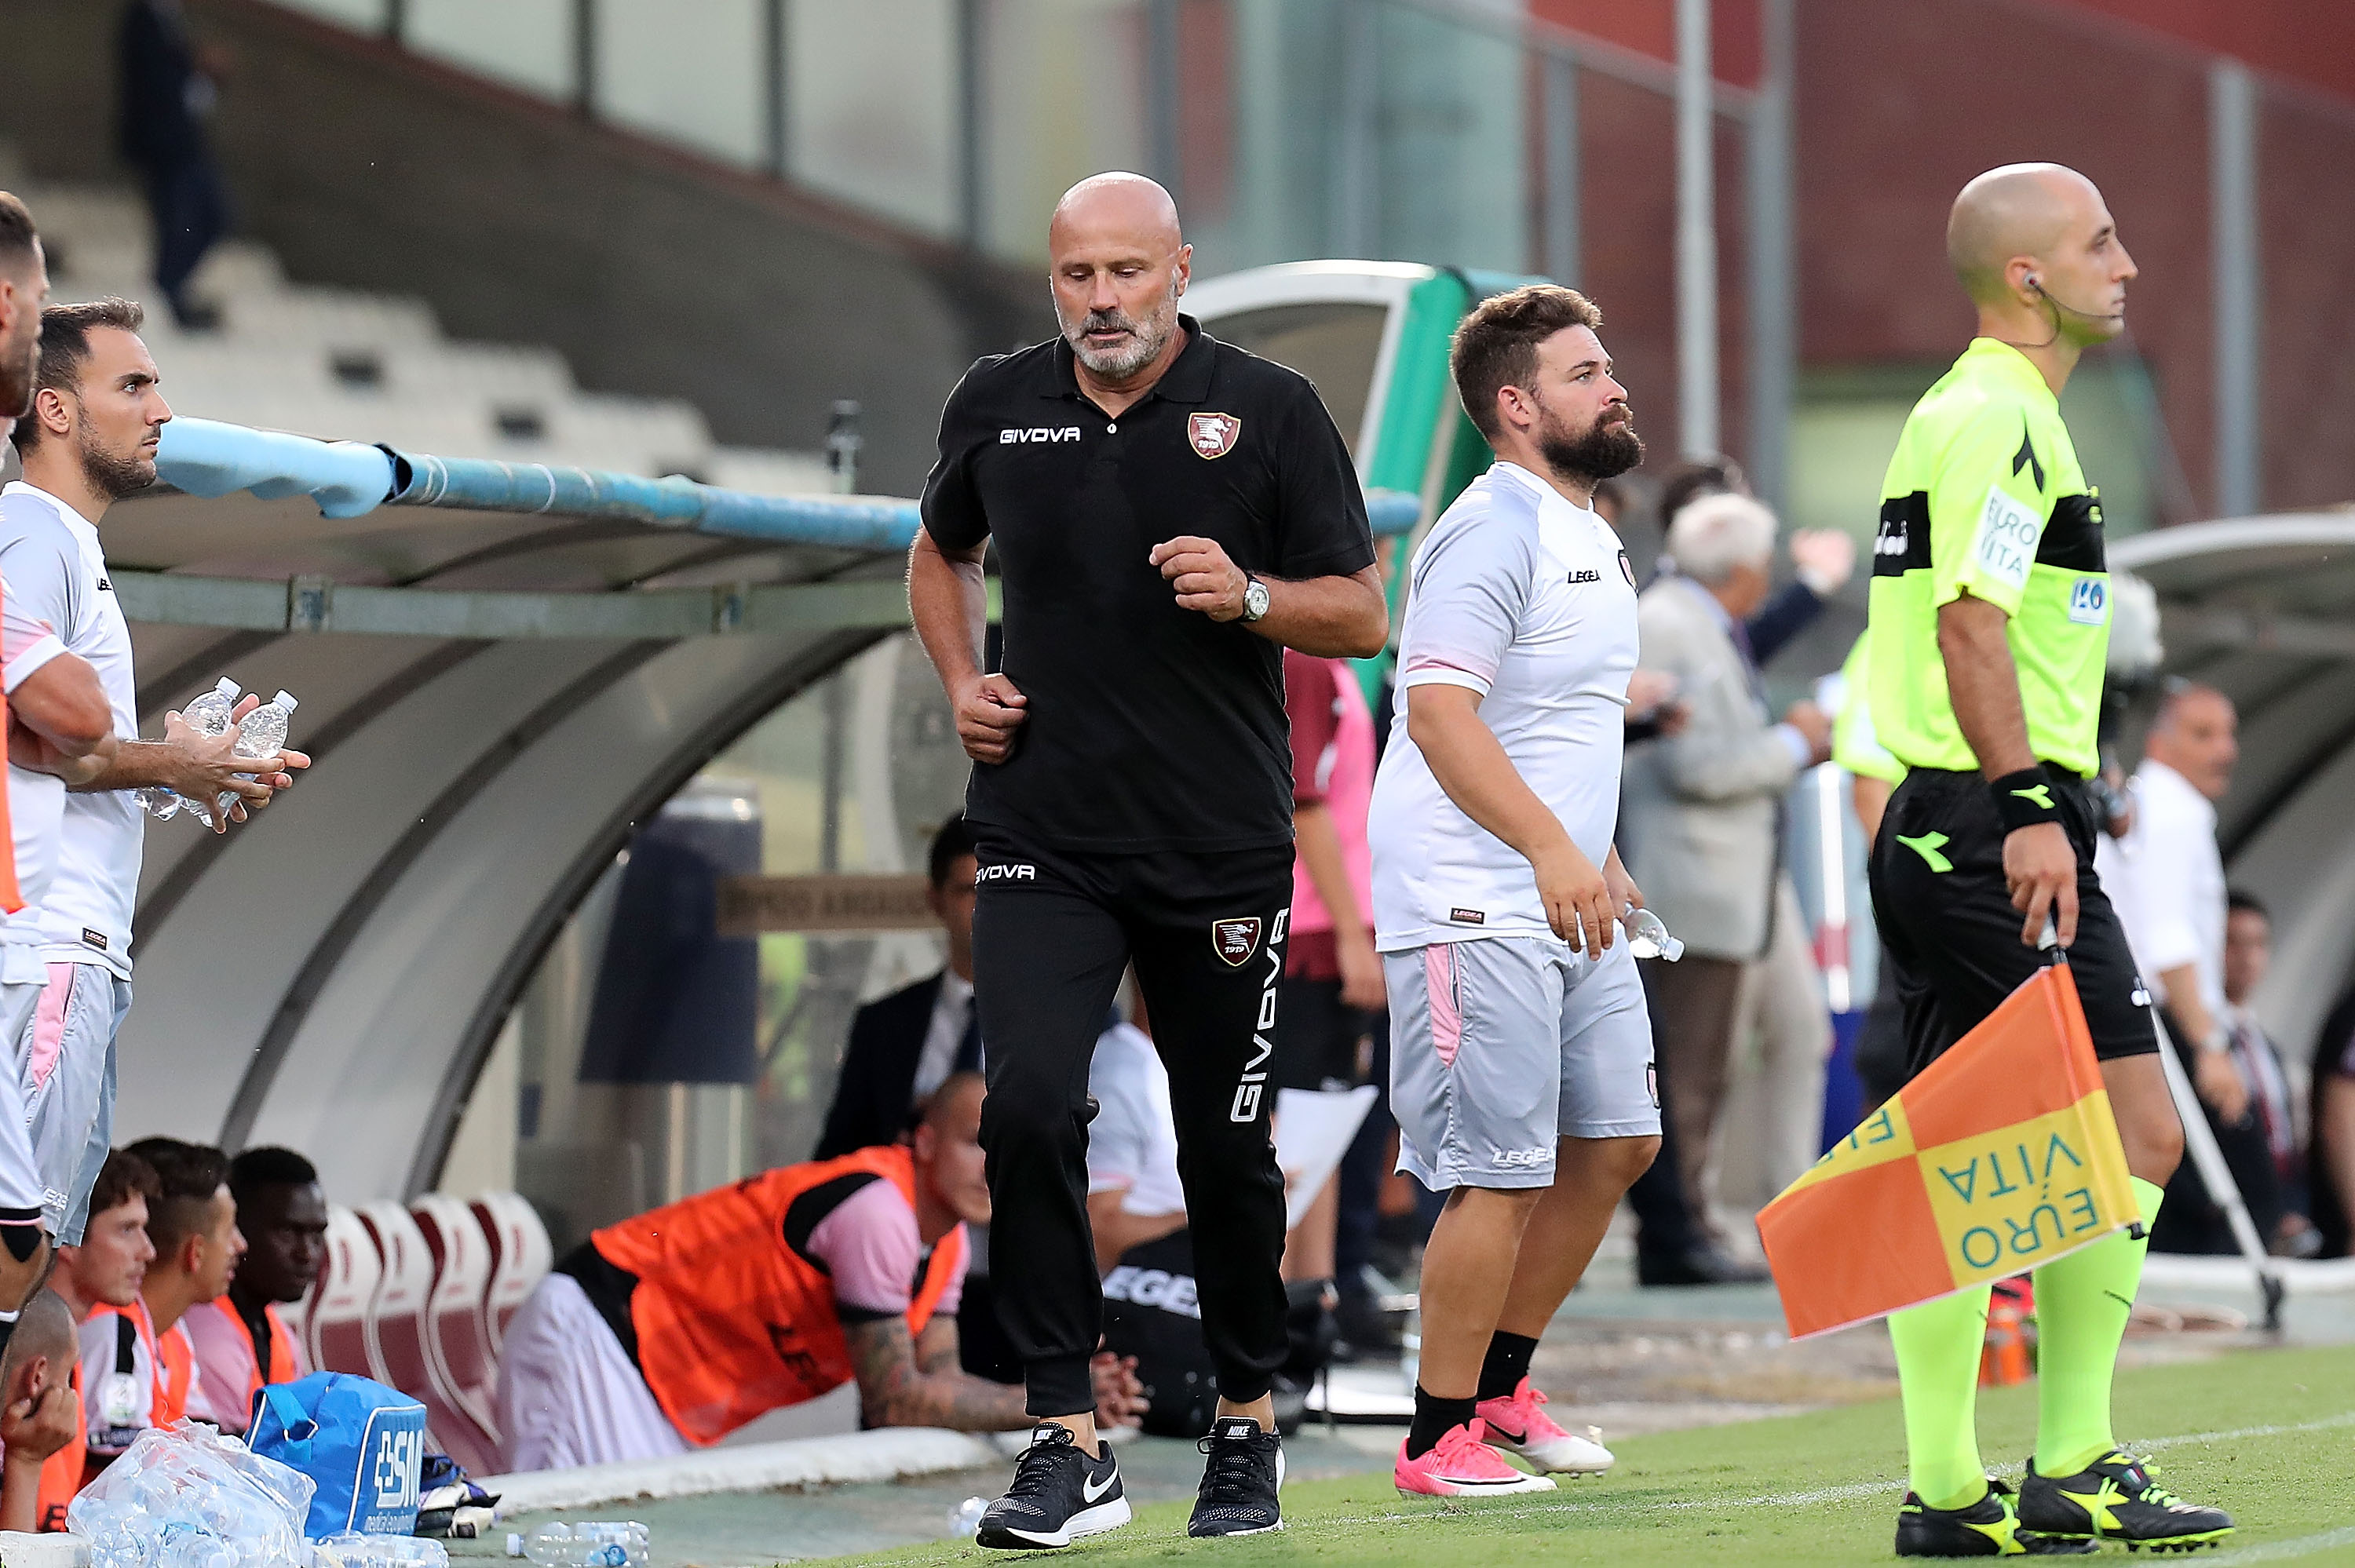 SALERNO, ITALY - AUGUST 25:  Coach of US Salernitana Stefano Colantuono is expelled from the pitch during the Serie B match between US Salernitana and US Citta di Palermo on August 25, 2018 in Salerno, Italy.  (Photo by Francesco Pecoraro/Getty Images)